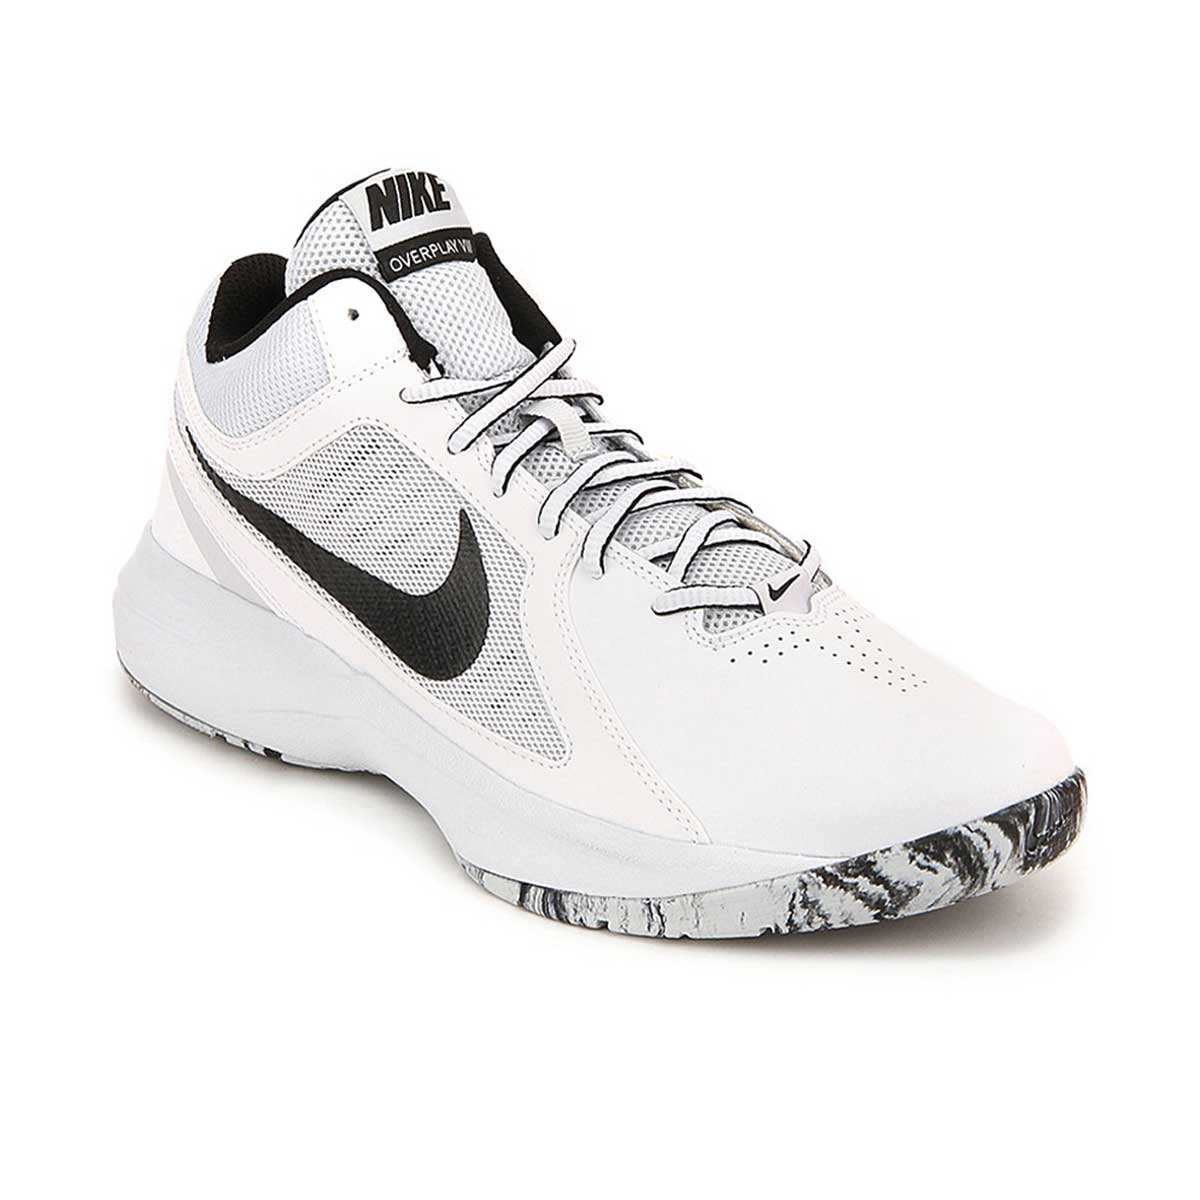 the overplay viii grey basketball shoes